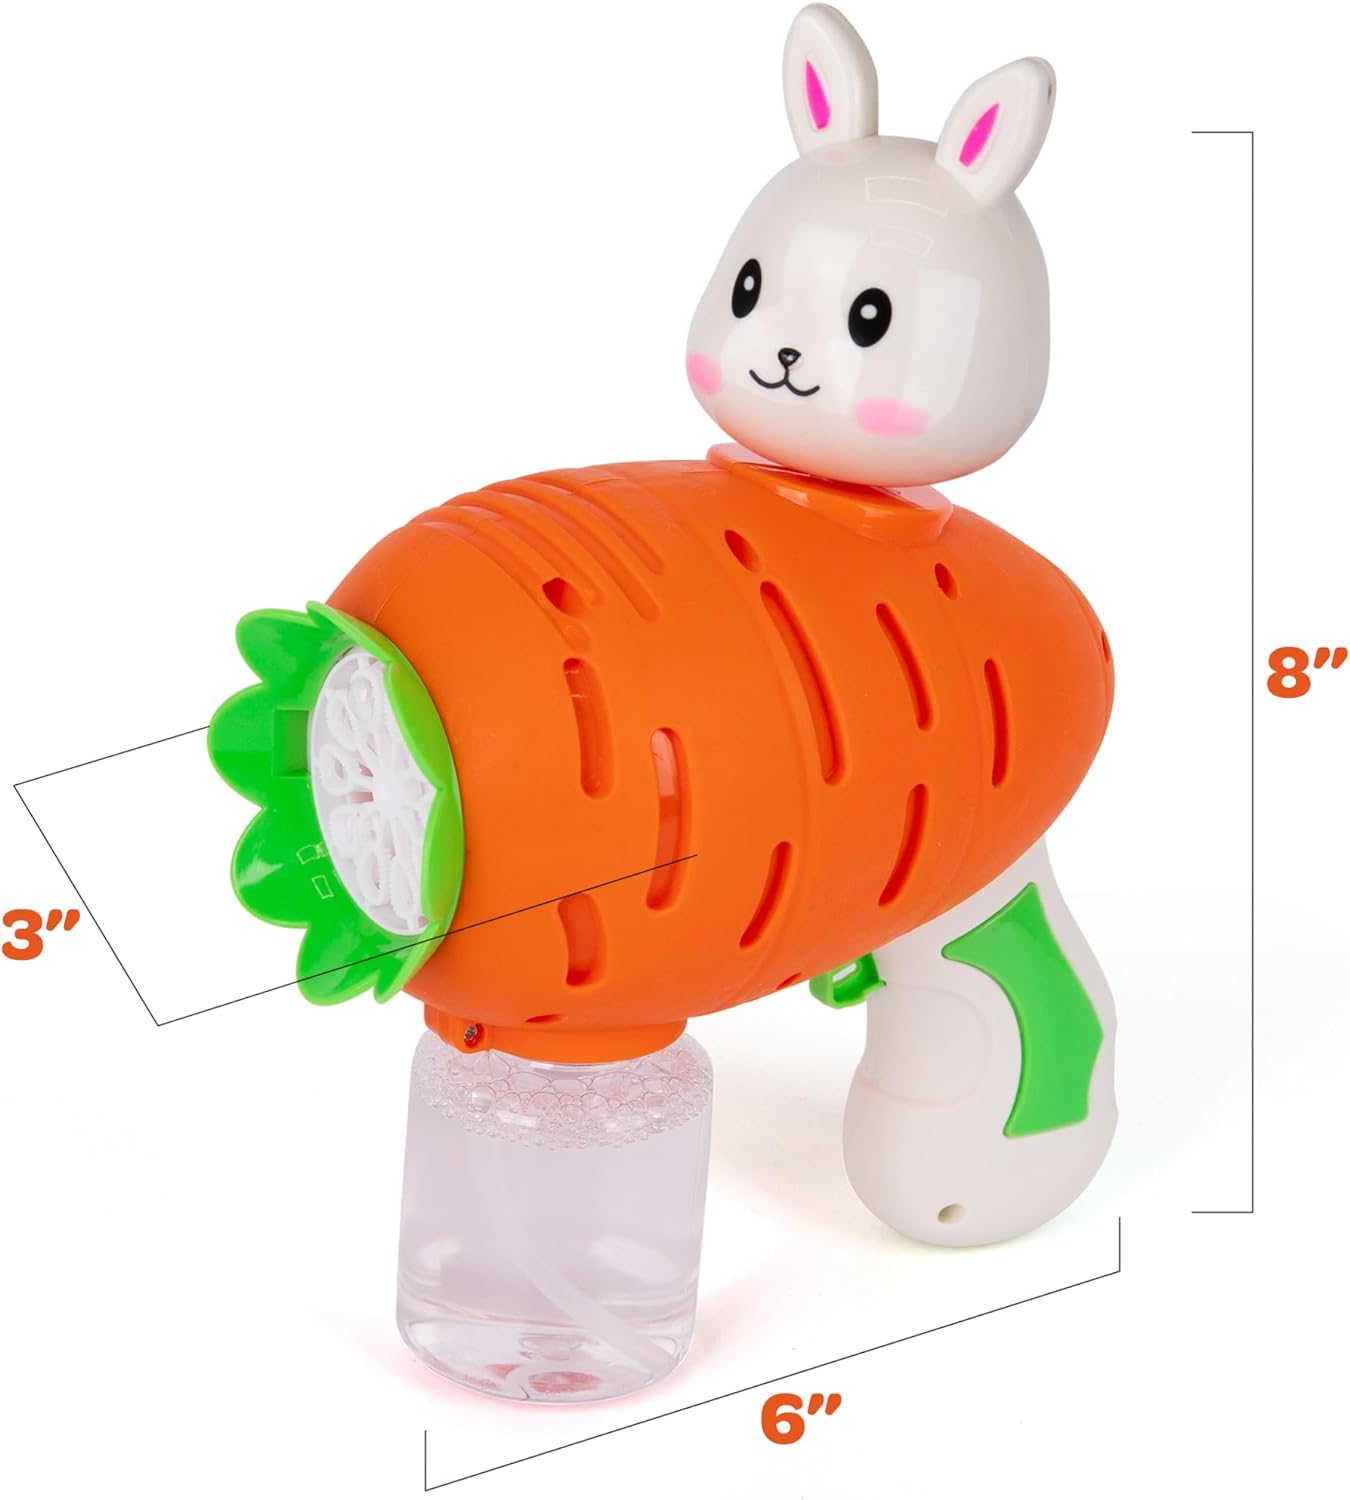 ArtCreativity Easter Bubble Gun for Kids - Carrot-Shaped Bubble Gun with 100ml of Bubble Solution - Easter Toys for Boys and Girls - Easter Basket Stuffers for Kids - Bubble Play Set for Ages 3 and Up